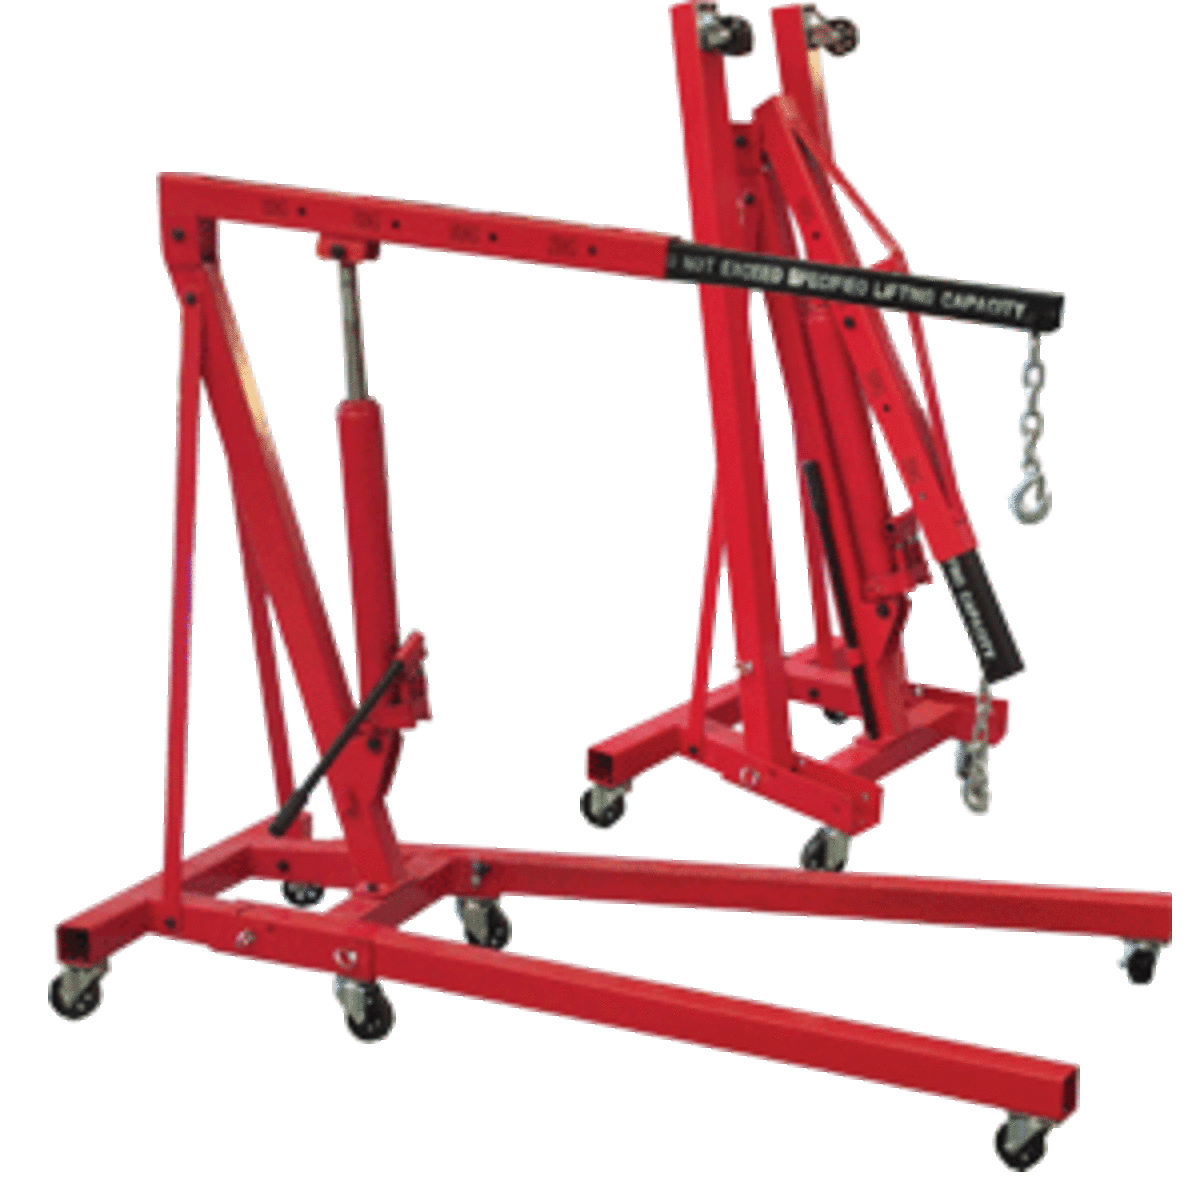 A folding engine lifter/crane/hoist is handy for many other lifting jobs around the workshop as well as lifting engines in and out of cars.